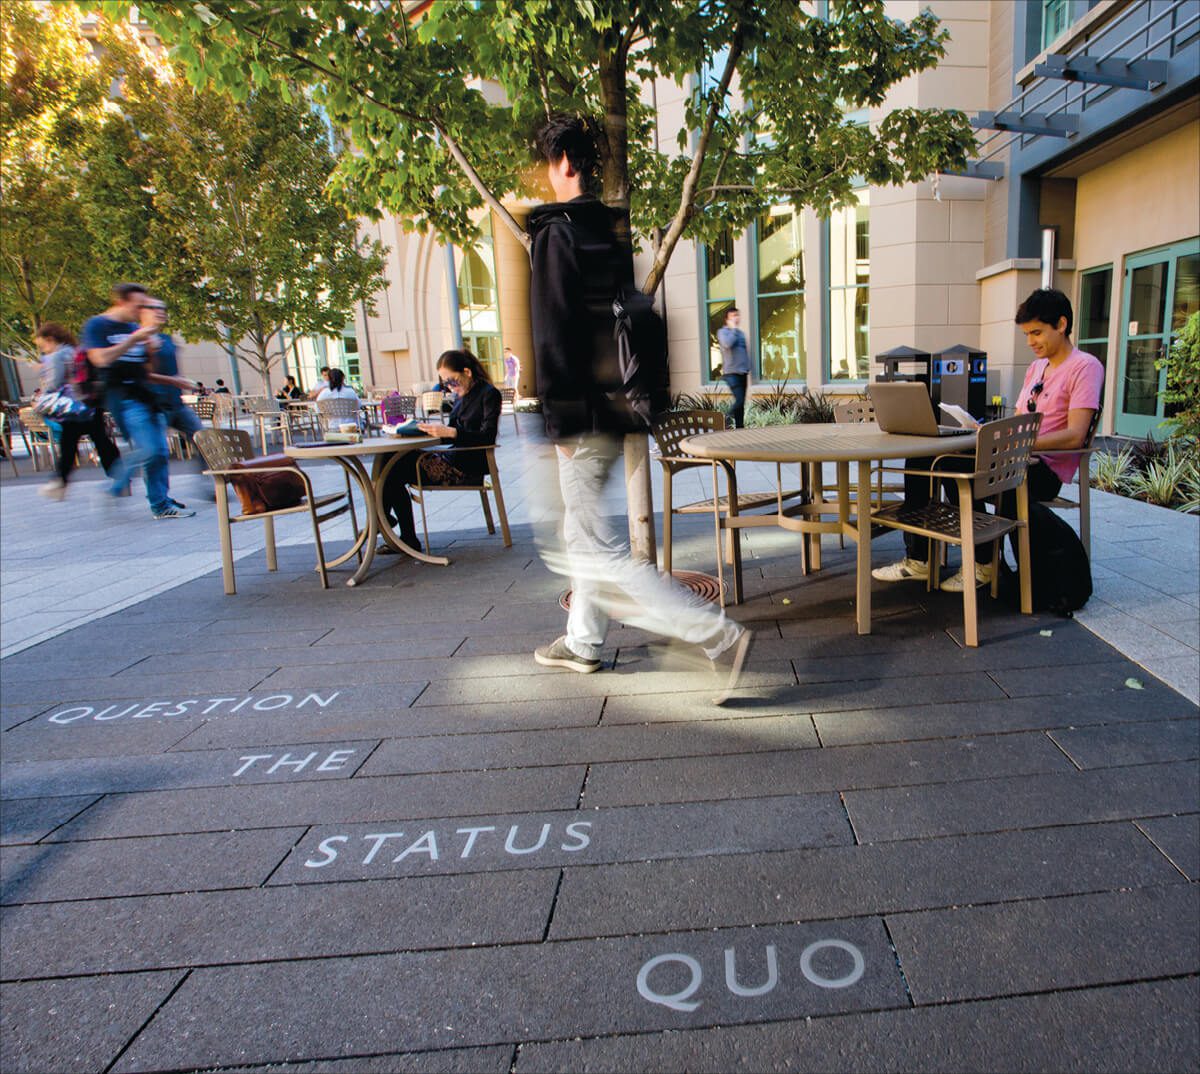 Berkeley Haas courtyard showing Question the Status Quo etched into the pavement. Some students sit at tables others are walking; the photo shows the motion of their bodies.